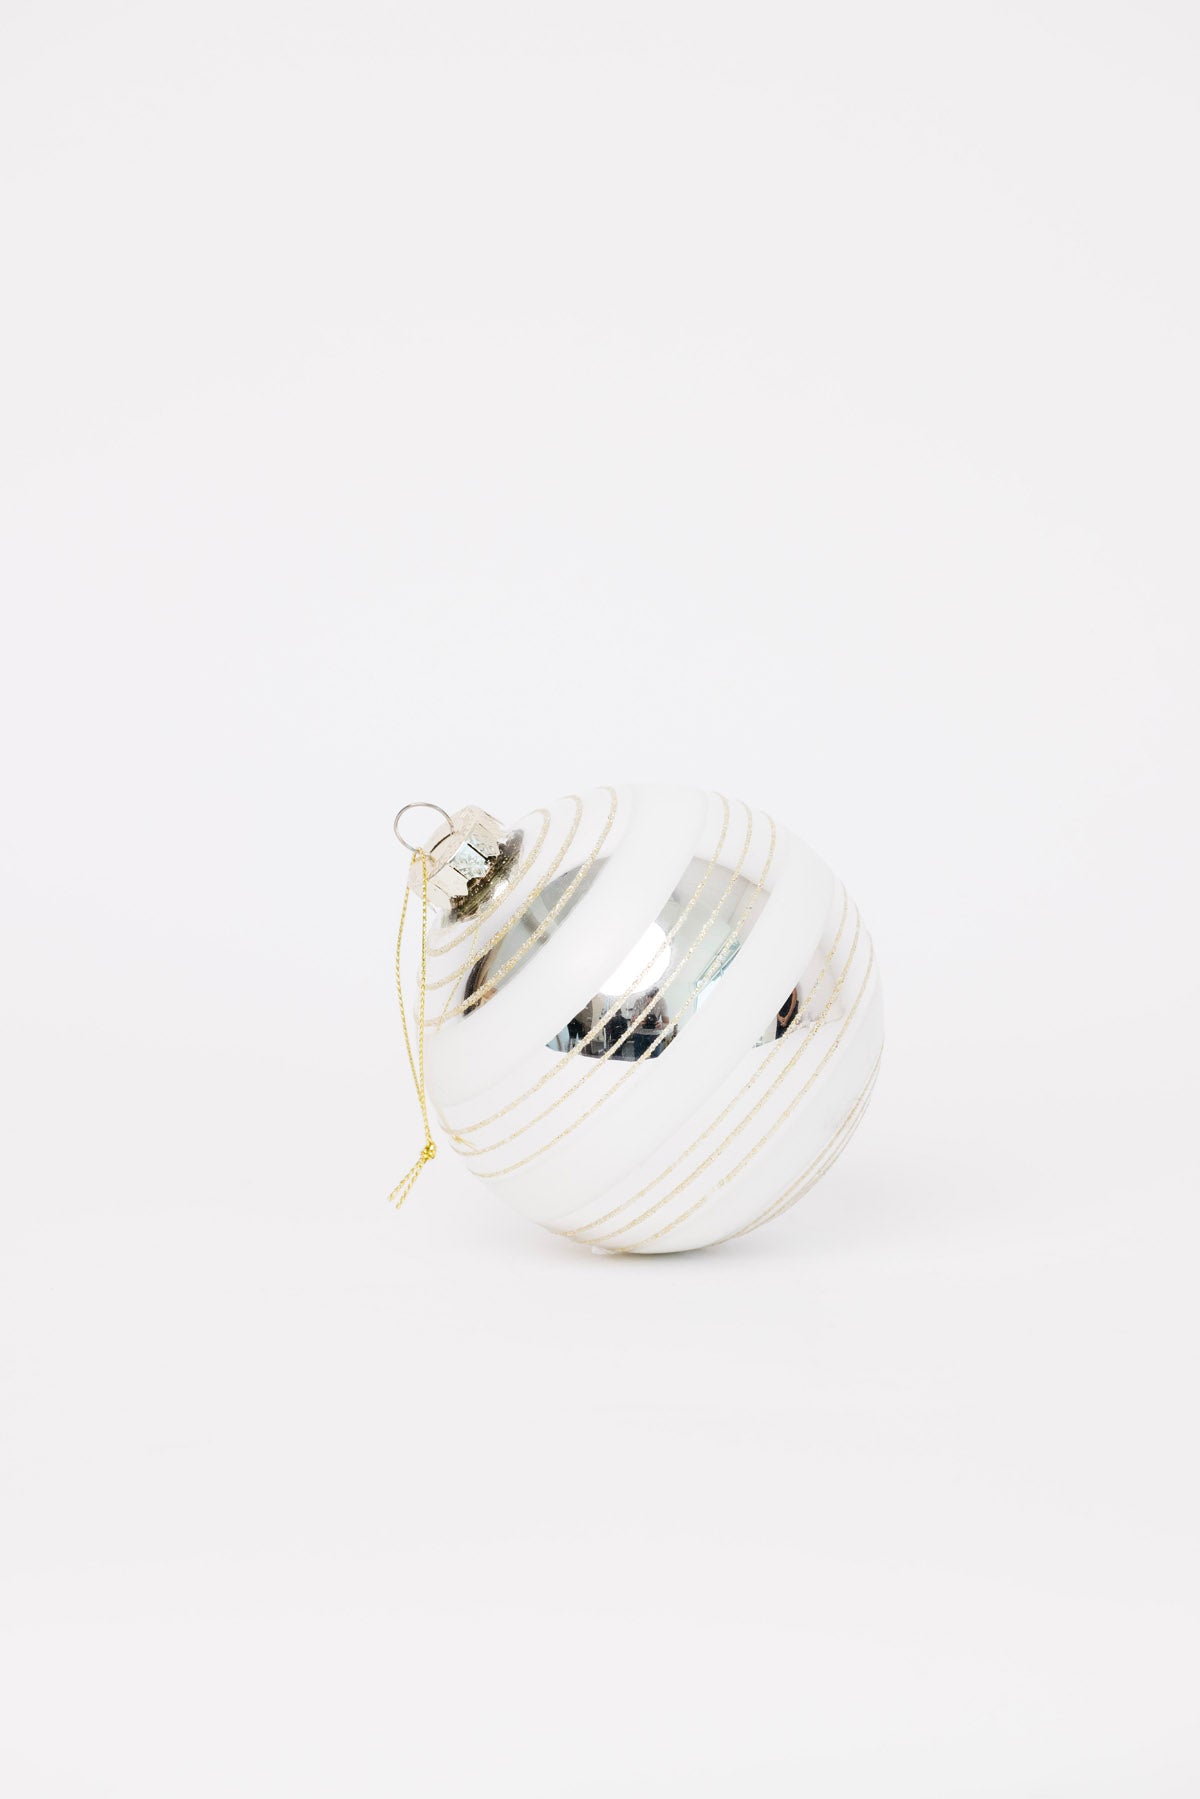 Everything Nice Striped Ornament - Round